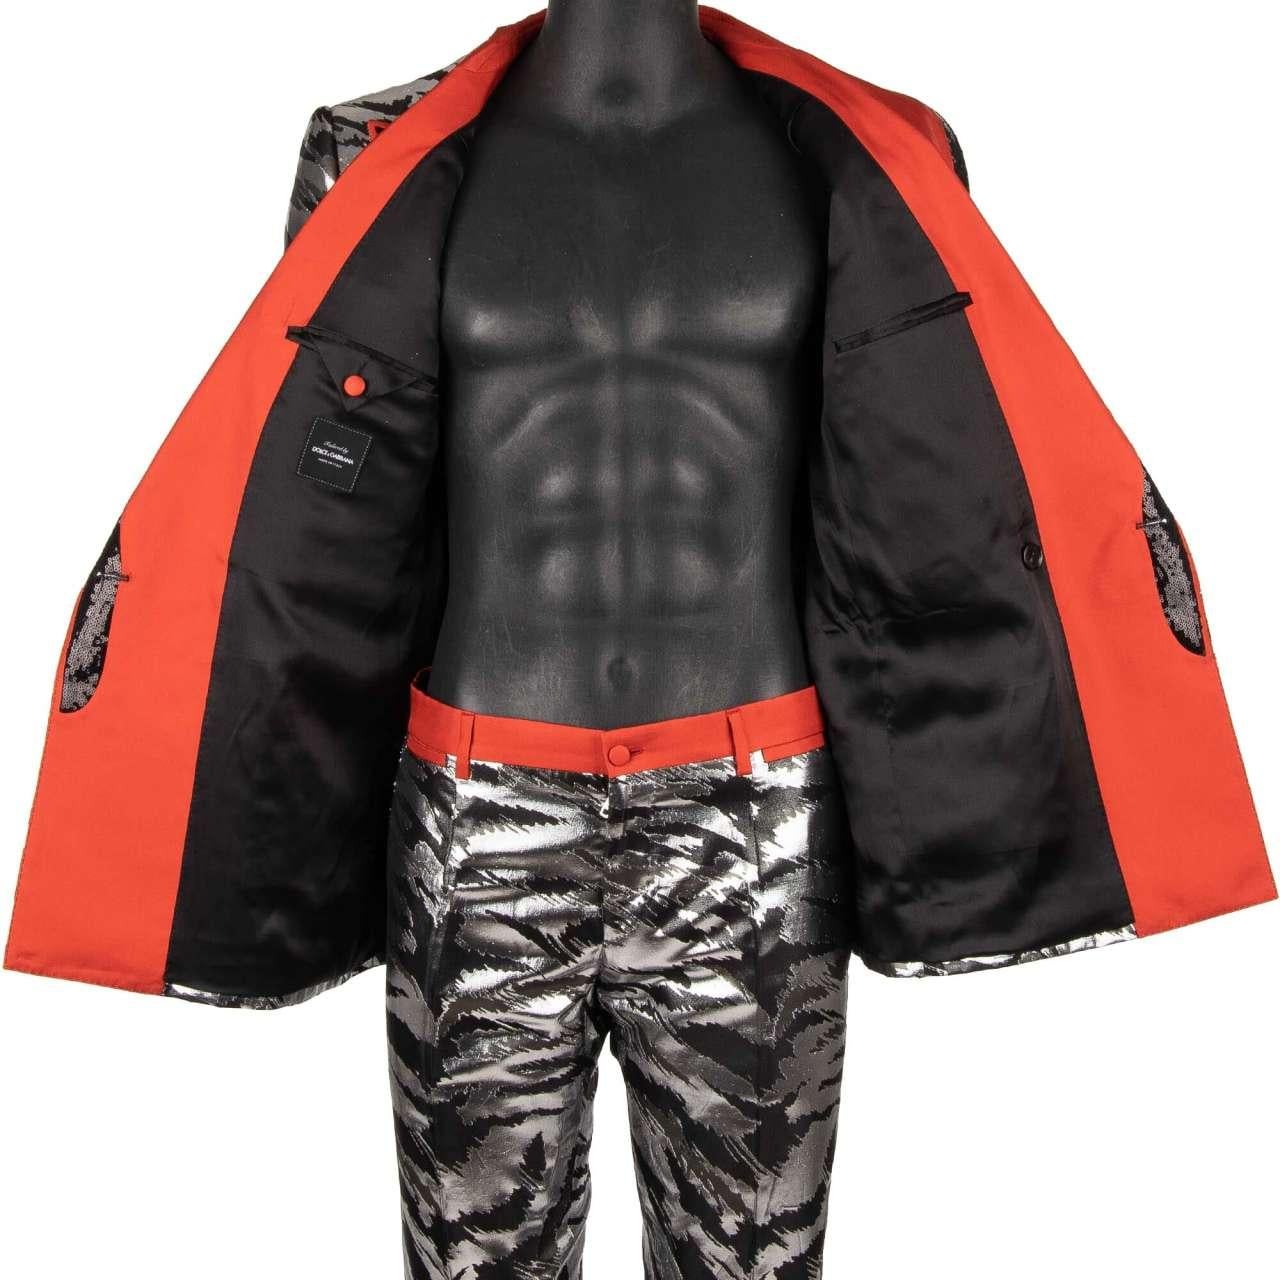 - Metallic jacquard double-breasted suit with sequins and peak lapel in silver, black and red by DOLCE & GABBANA - RUNWAY - Dolce & Gabbana Fashion Show - New with tag - MADE in ITALY - Slim Fit - Model: IK7CMZ-HJMBU-HIIIN - Material: 45% Polyester,